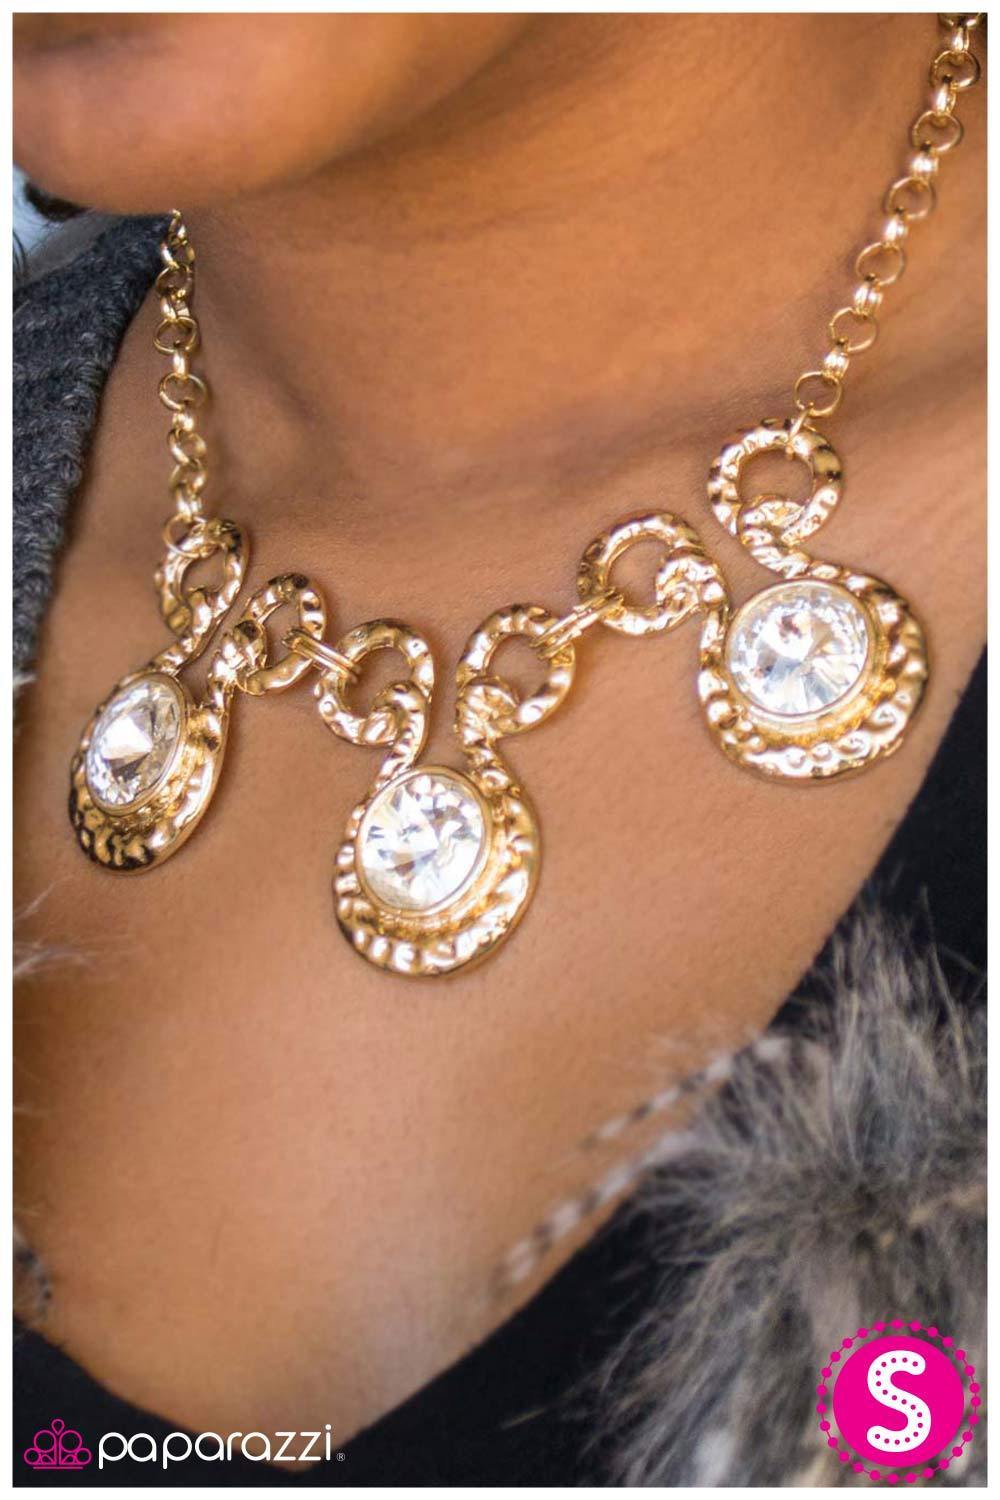 Hypnotized - Gold and White Rhinestone Necklace and matching Earrings - Paparazzi Accessories - model -CarasShop.com - $5 Jewelry by Cara Jewels